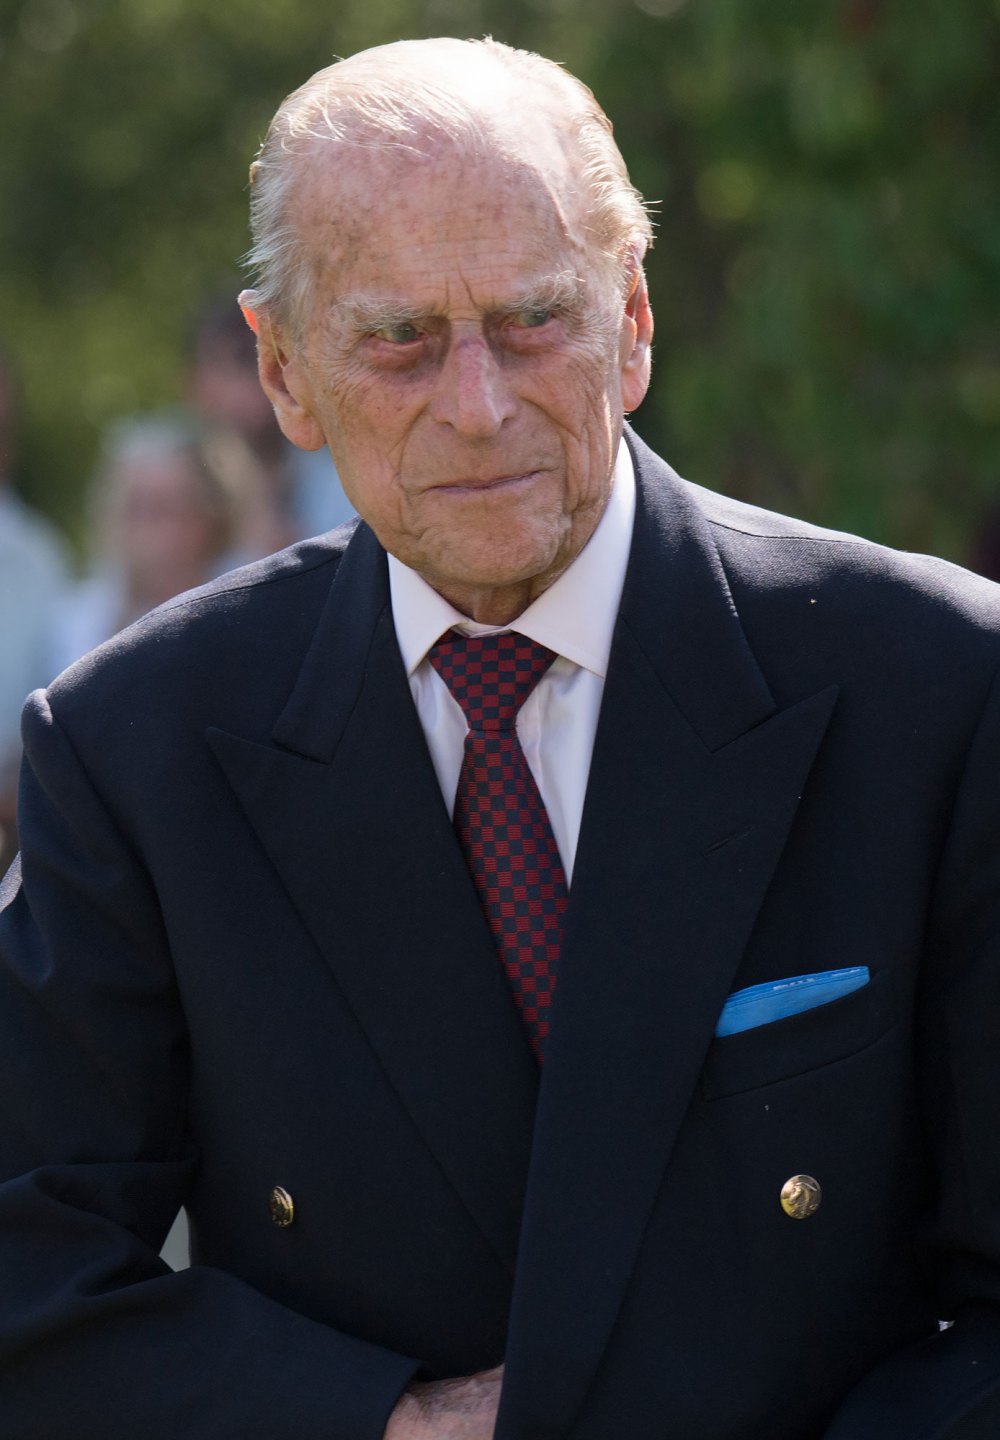 Prince Philip Will Likely ‘Remain in Hospital’ After Feeling Sick